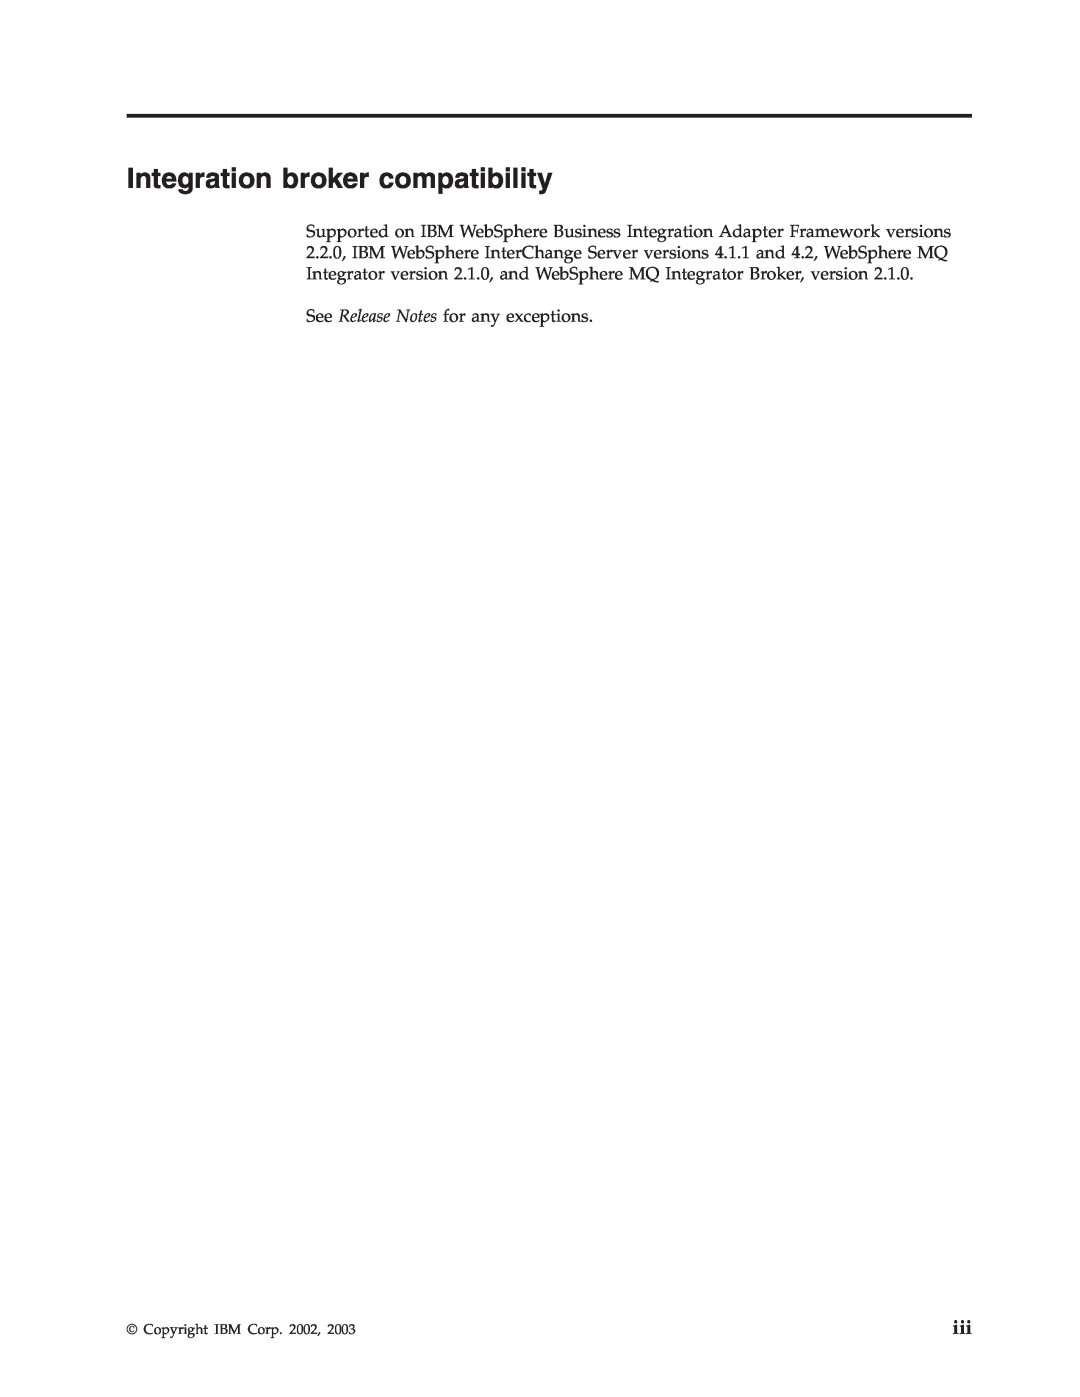 IBM WebSphere Business Integration Adapter manual Integration broker compatibility, See Release Notes for any exceptions 